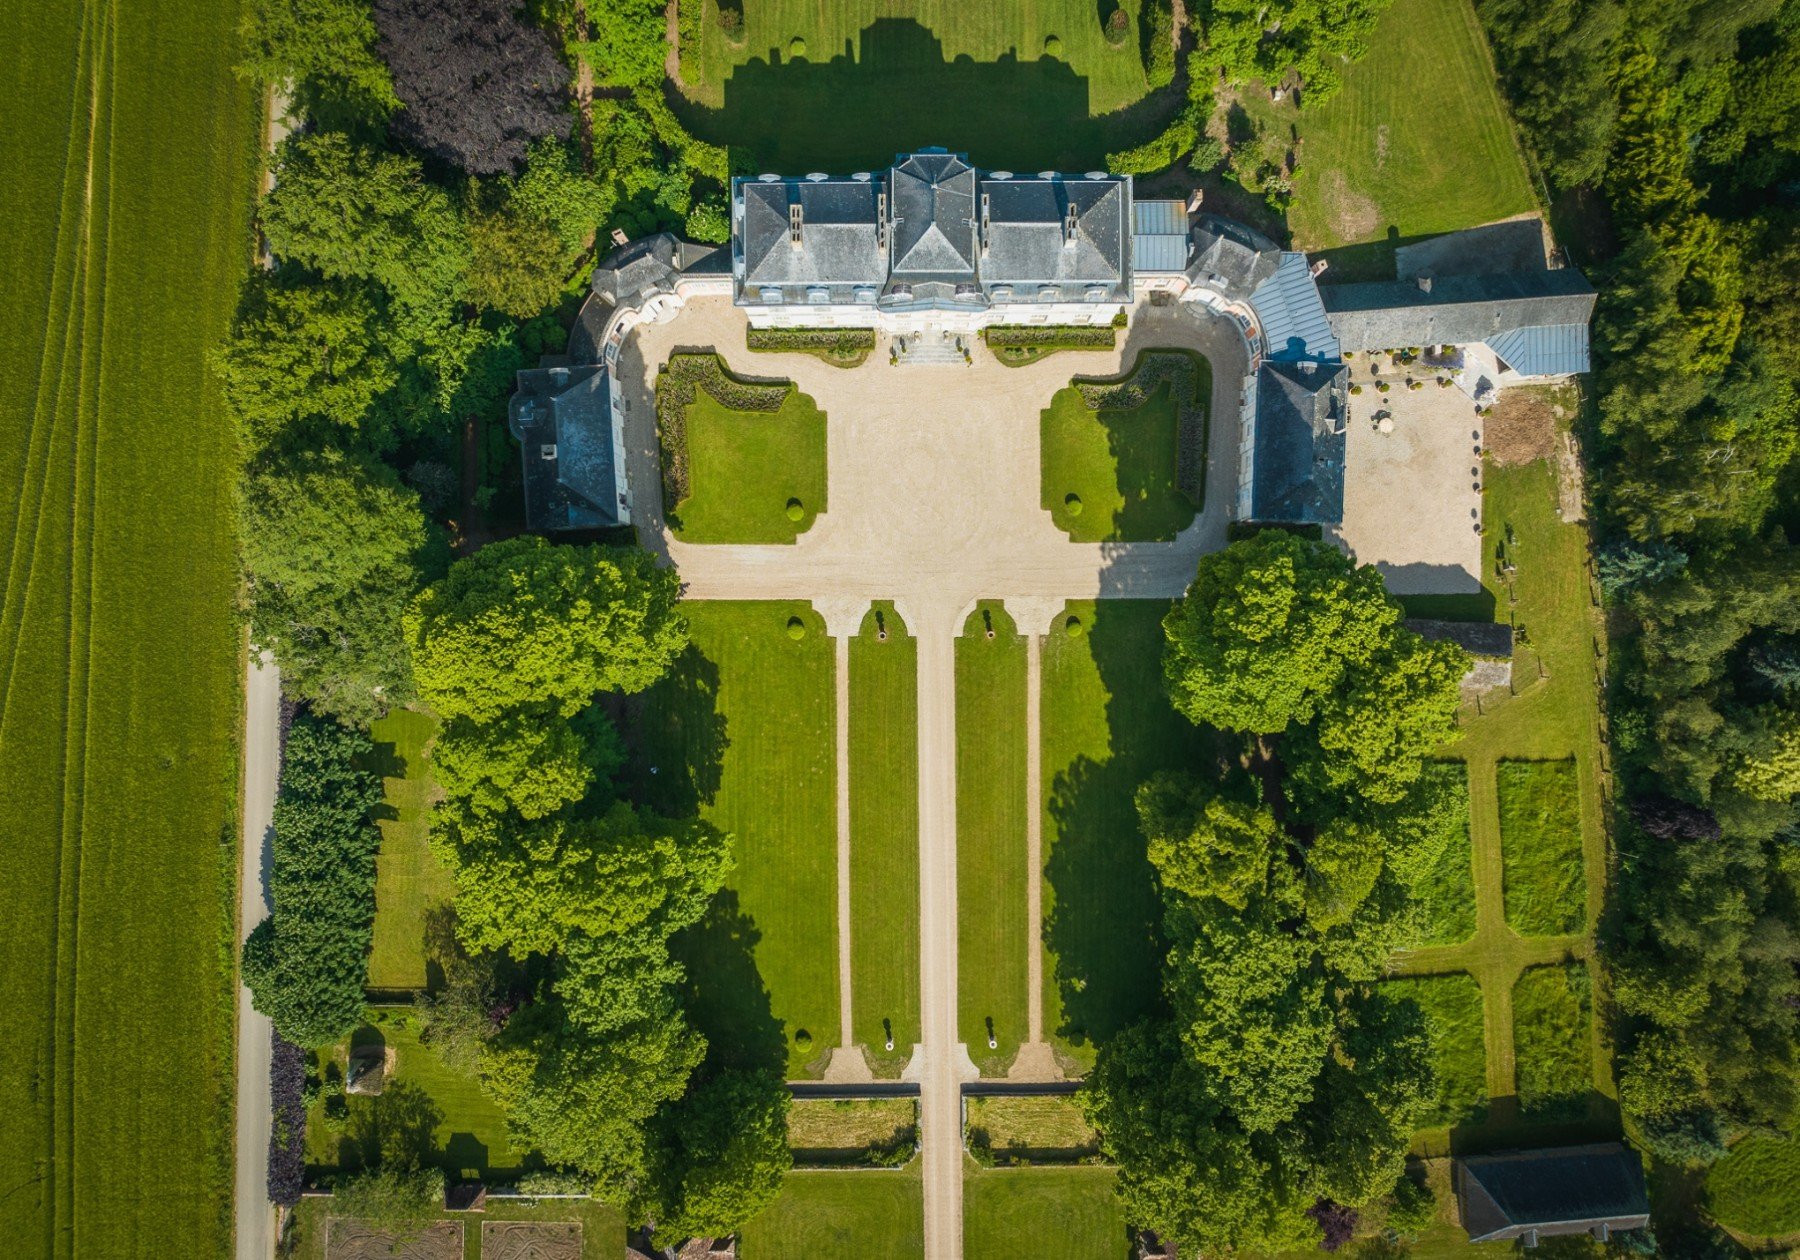 Francis+York+ 18th-Century French Chateau in Normandy  00022.jpg